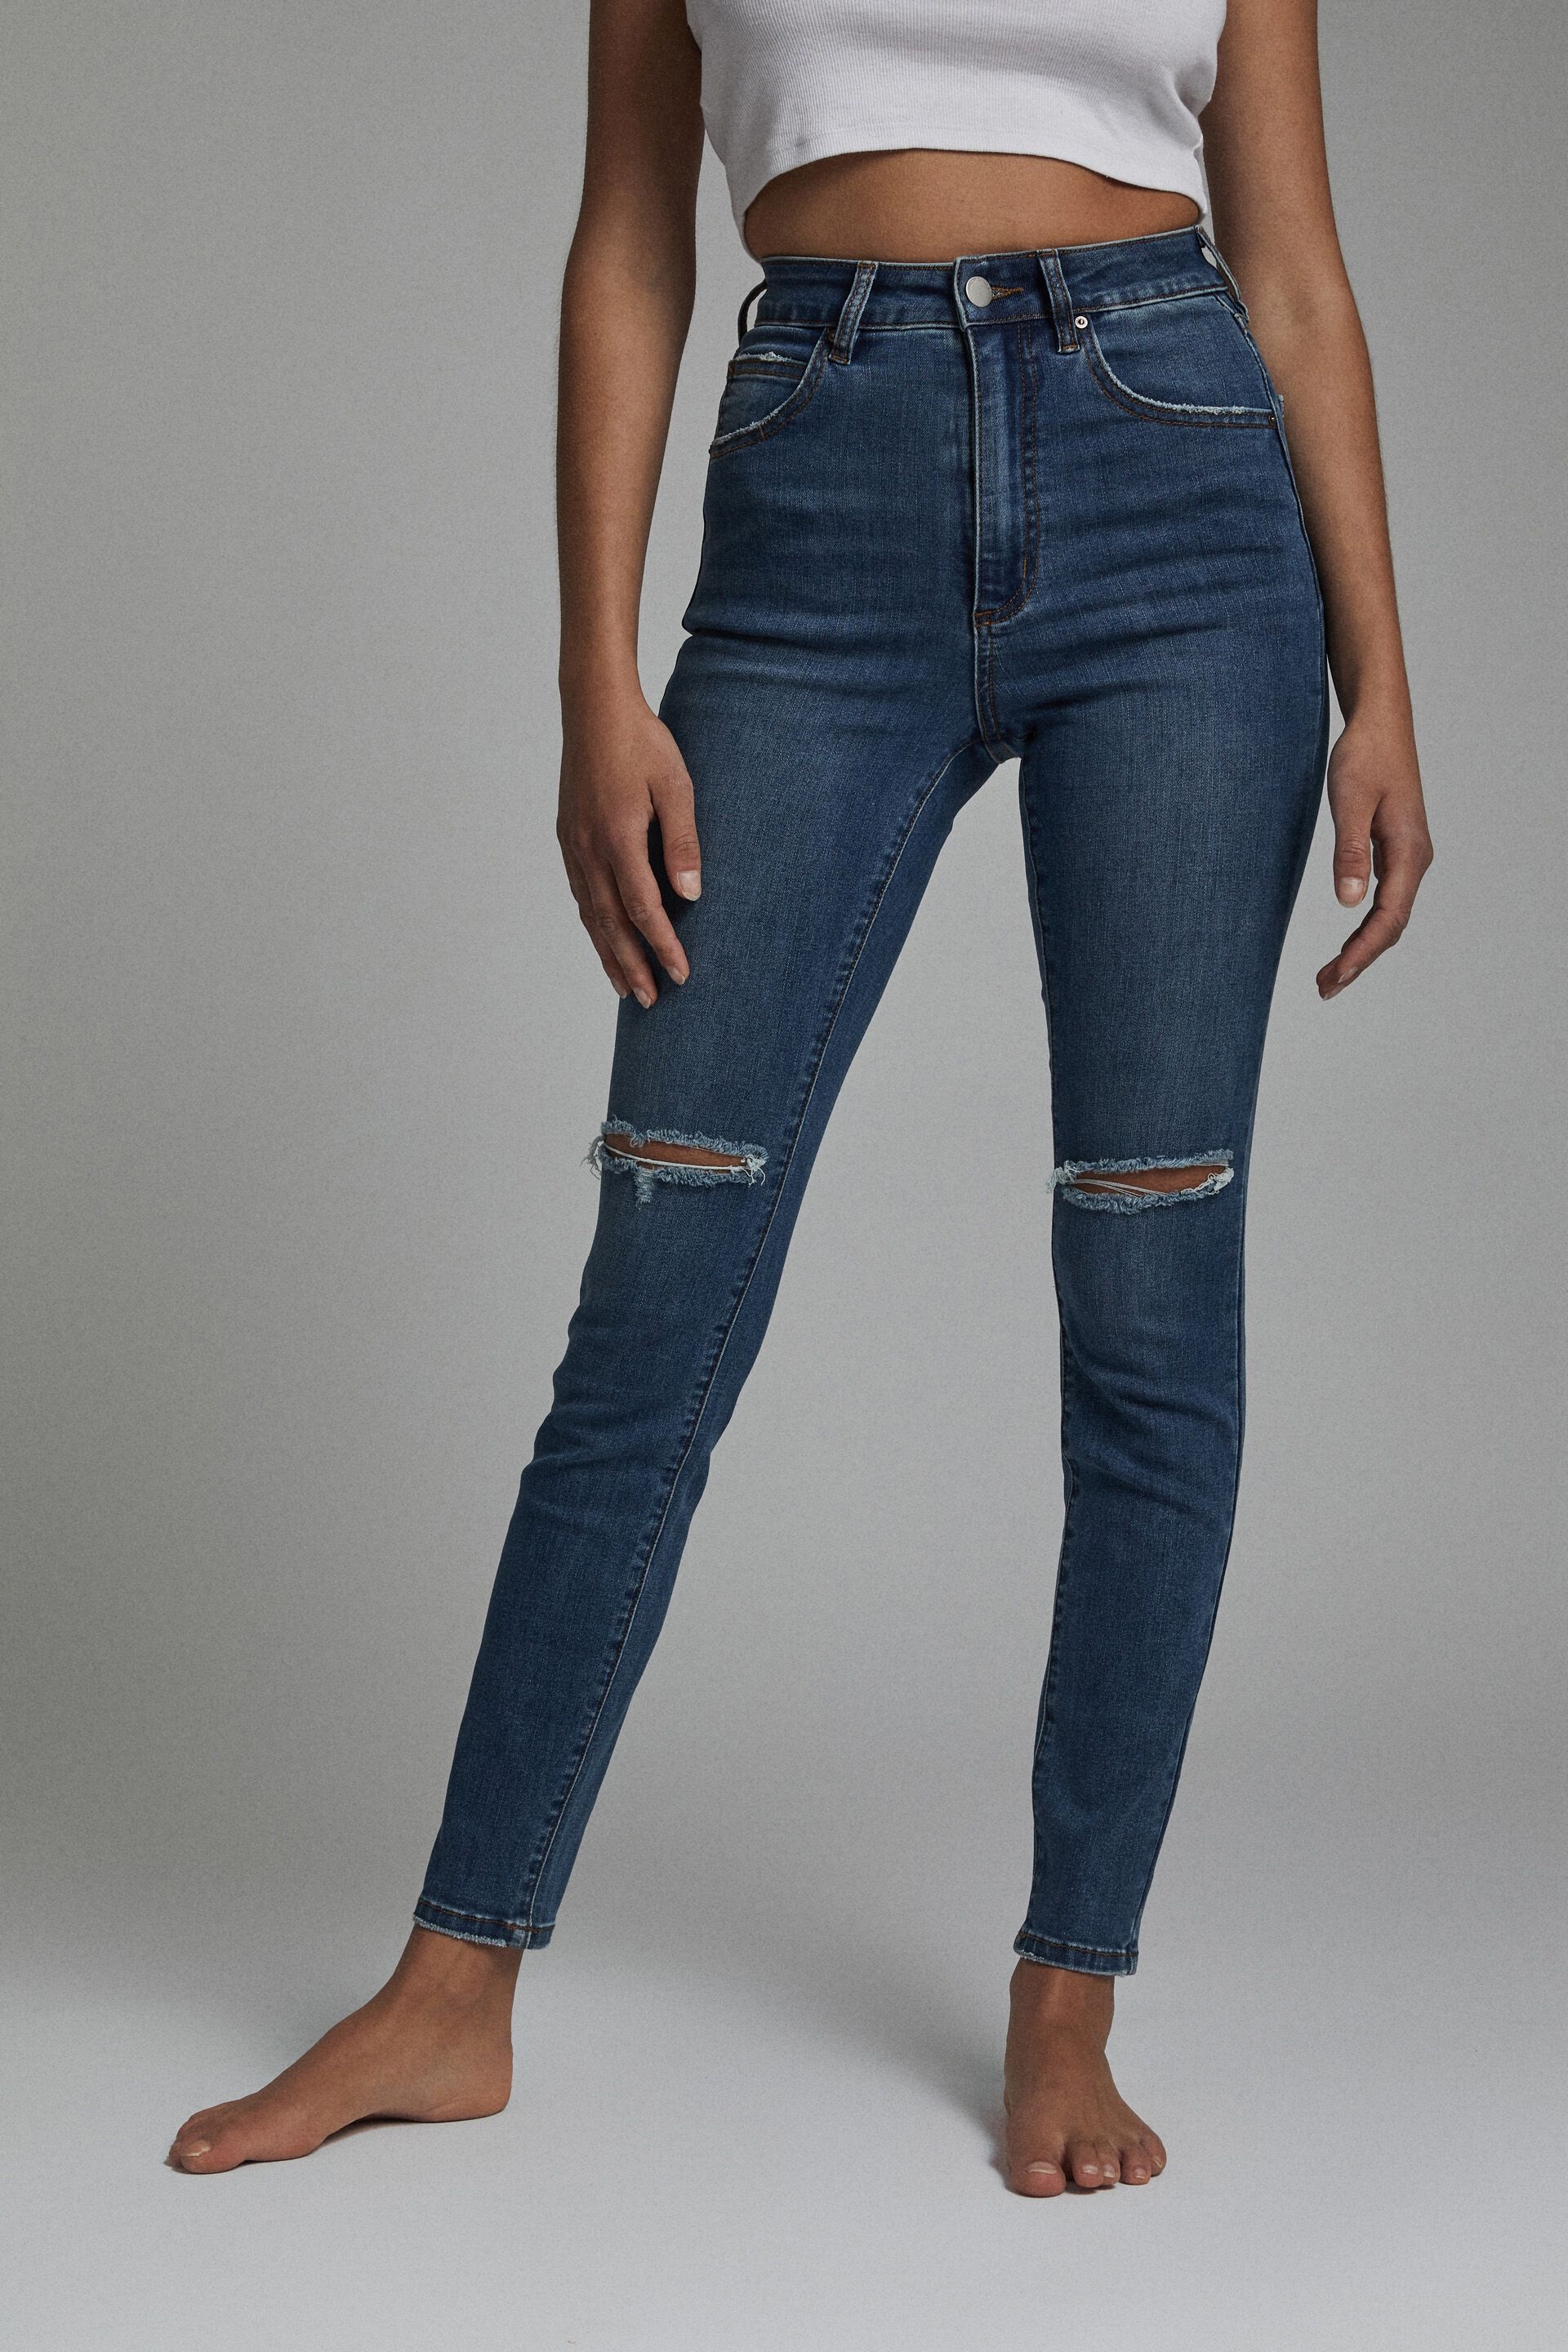 cotton on high skinny jeans